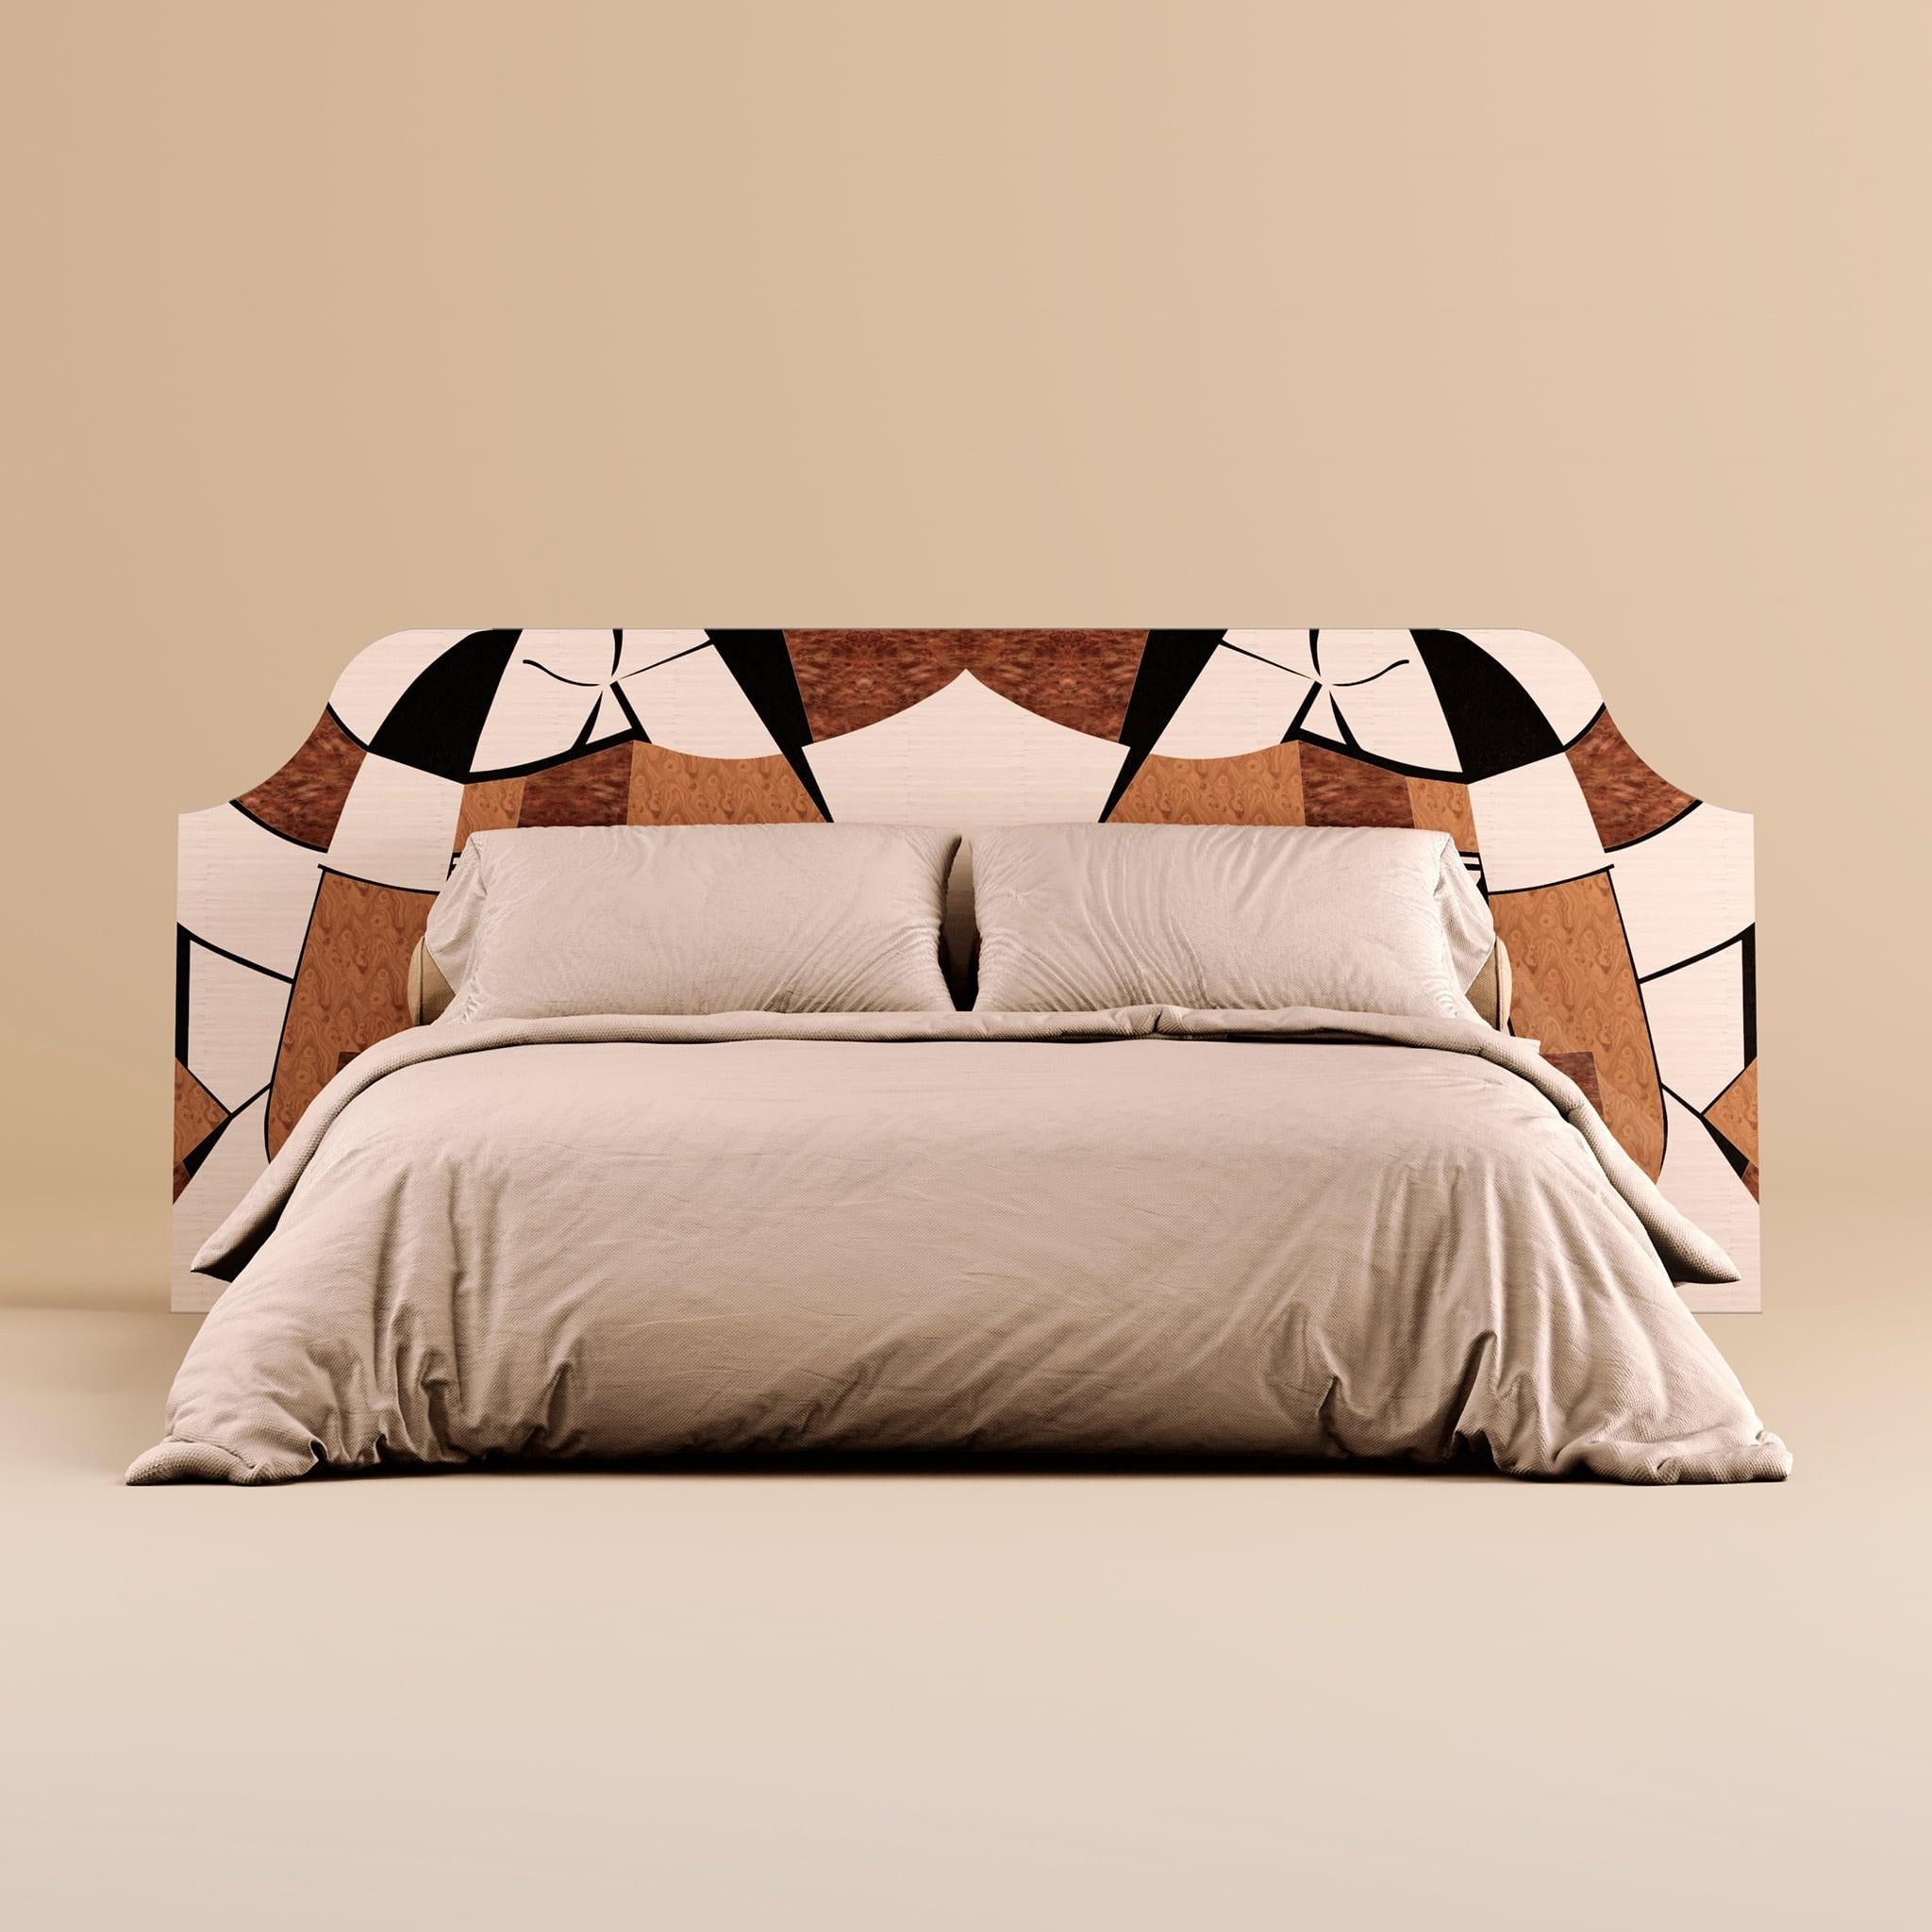 Mid-Century Modern 21st Century Contemporary Headboard Abstract in Wood Marquetry for Queen Bed For Sale